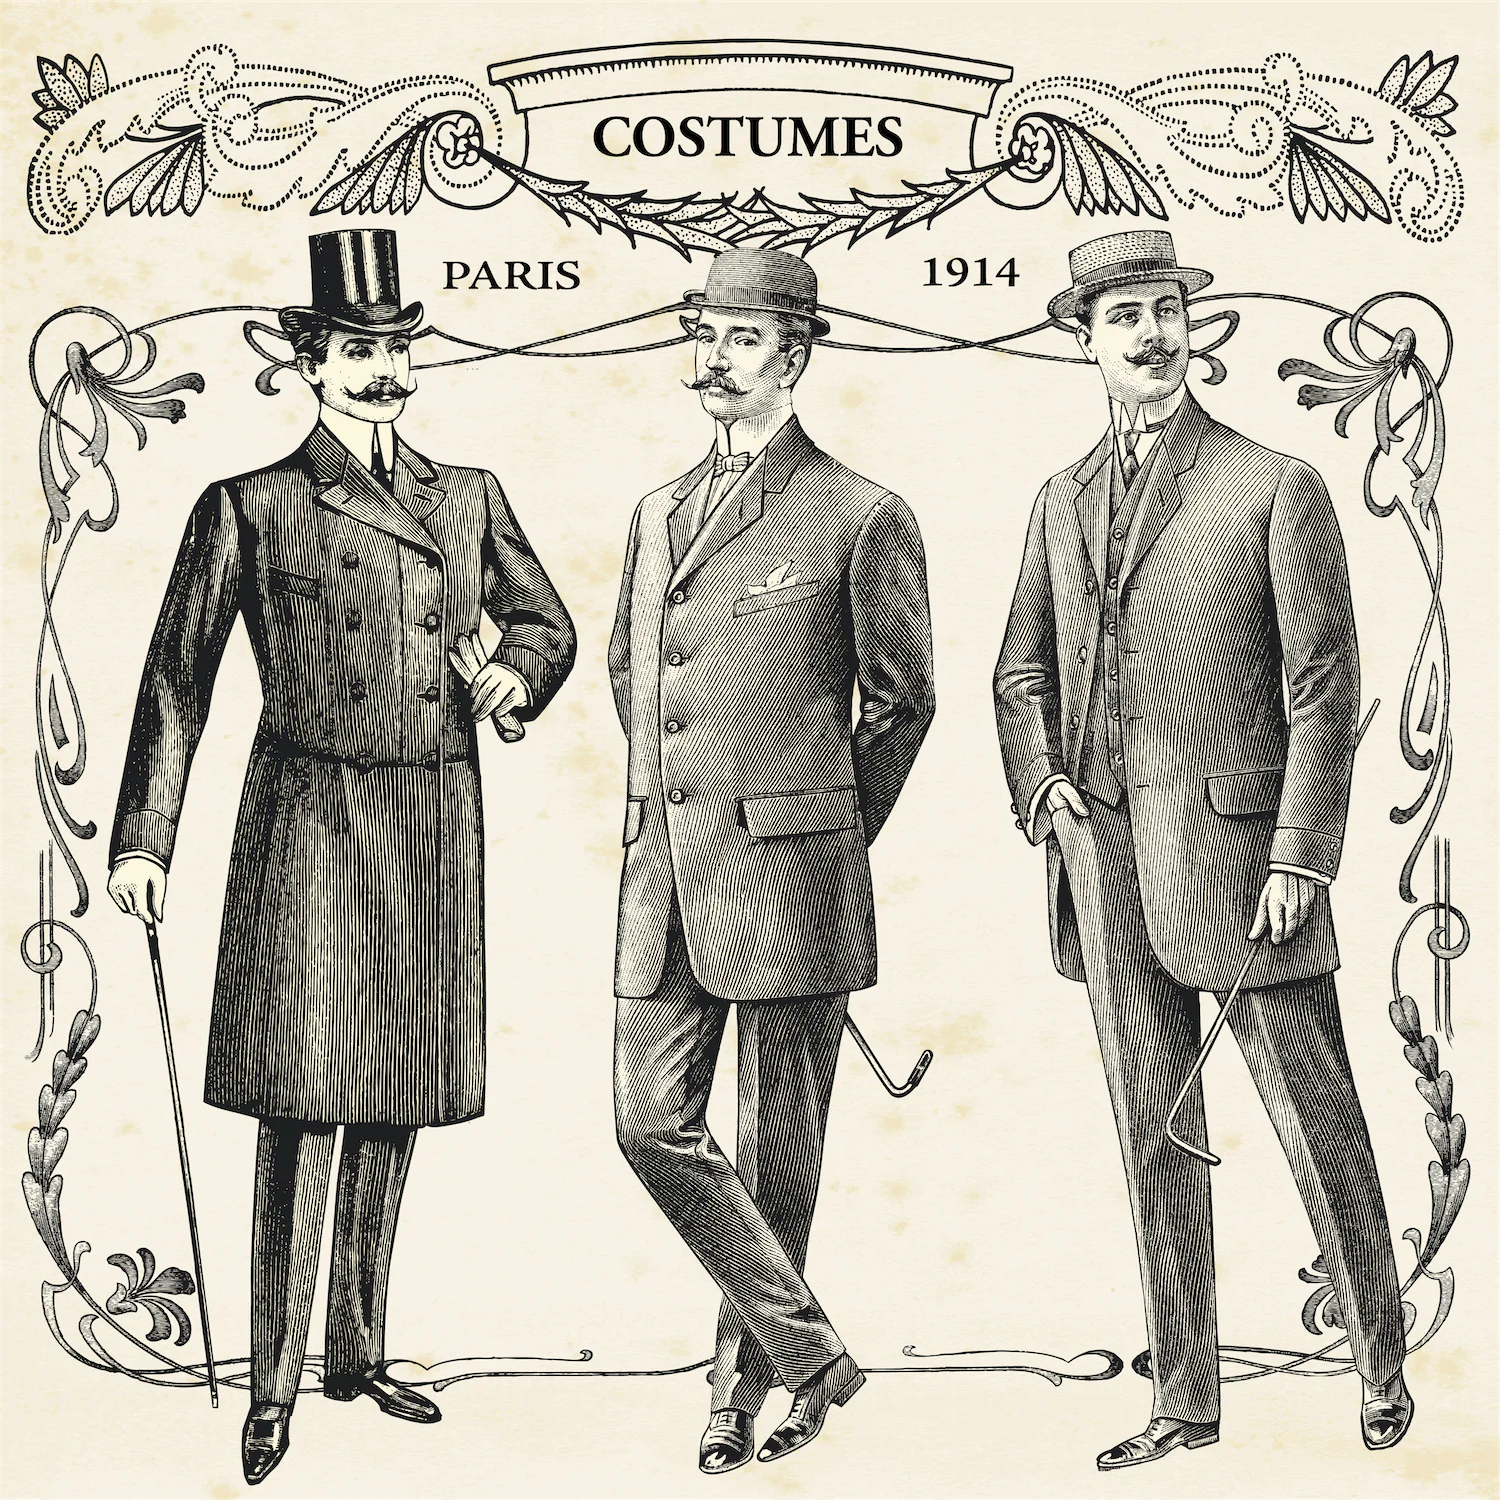 Beau Brummell's Revolution: The Rise of the Modern Men's Suit in the 19th Century